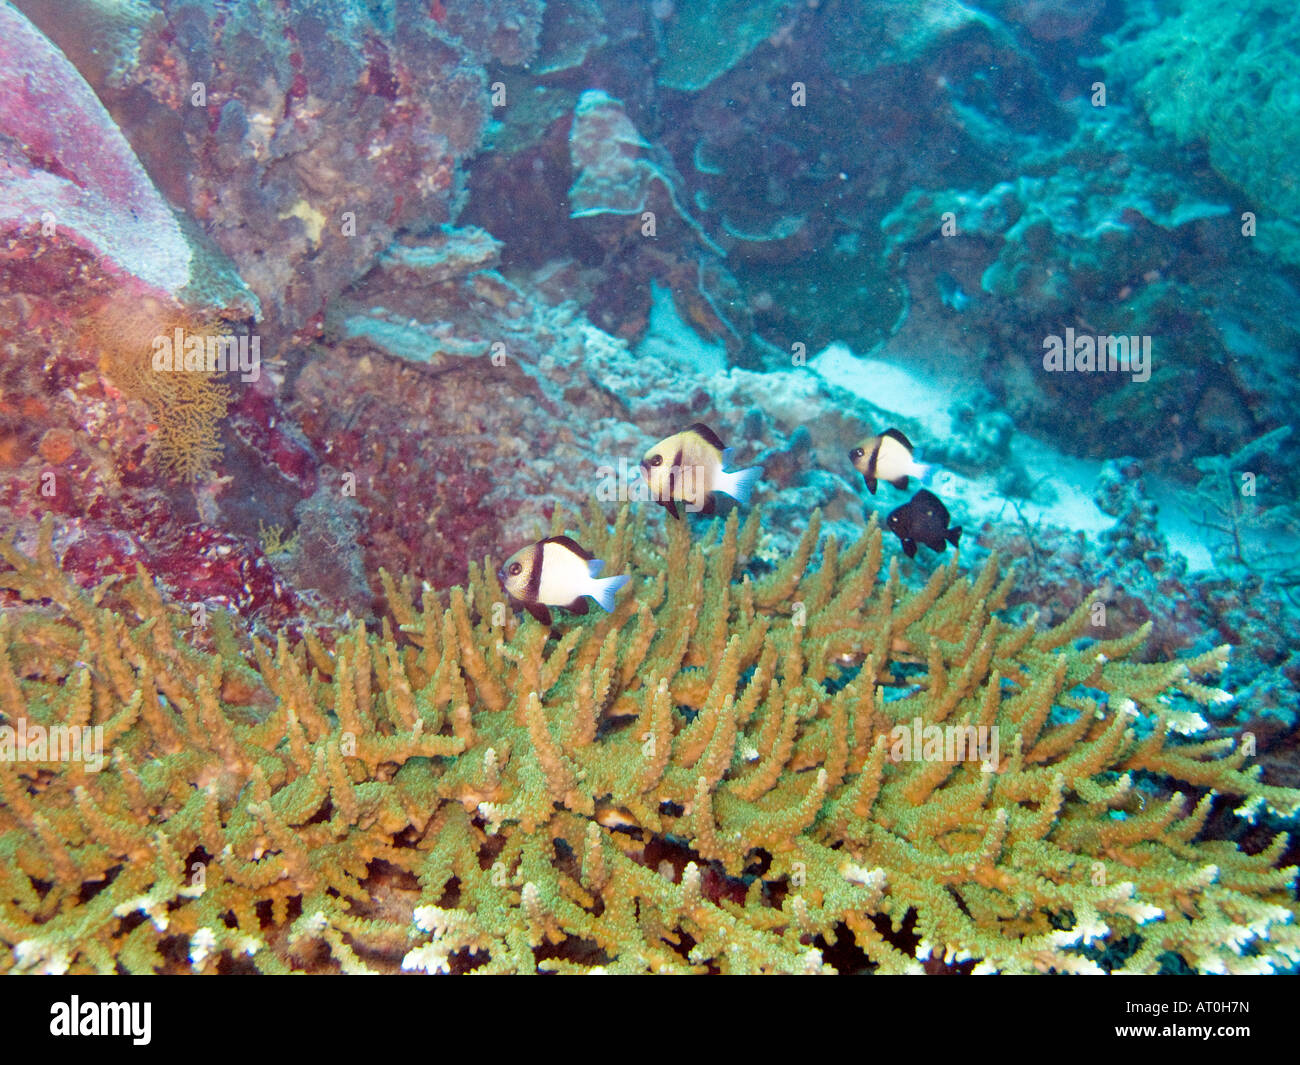 Damselfish over staghorn coral Stock Photo